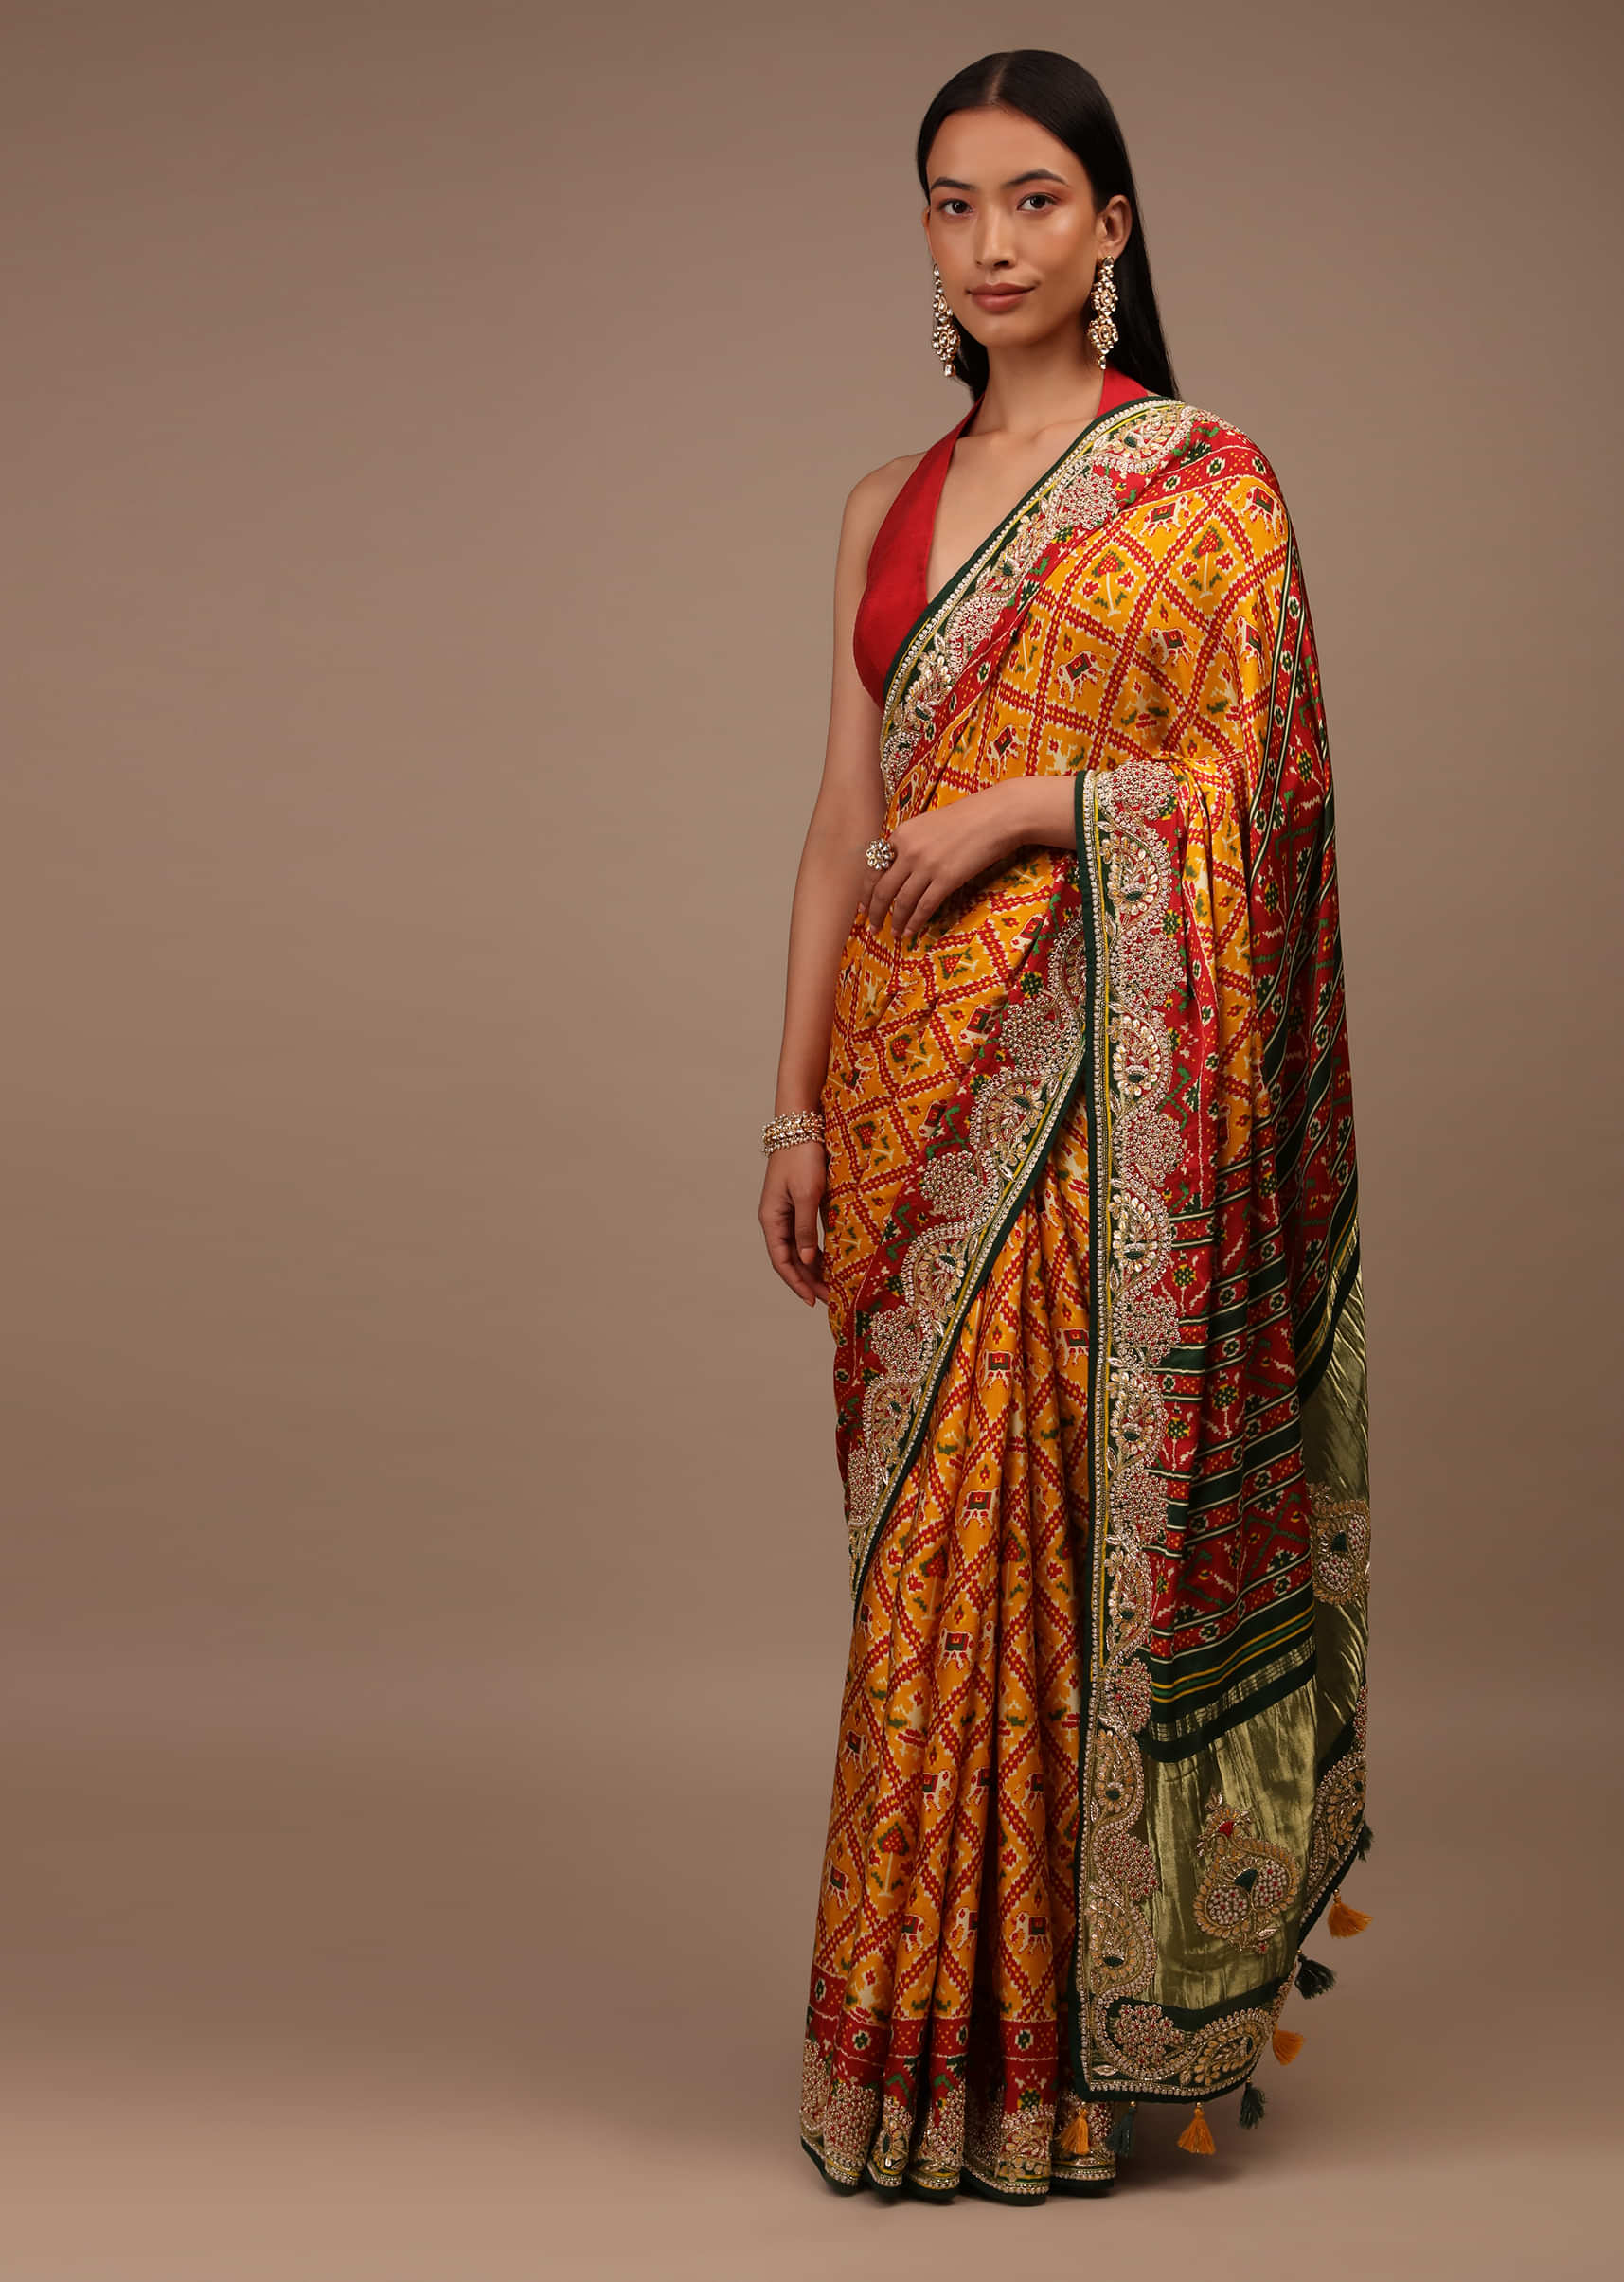 Radiant Yellow Saree In Satin With Multi Colored Patola Print And Gotta Patti Embroidered Border